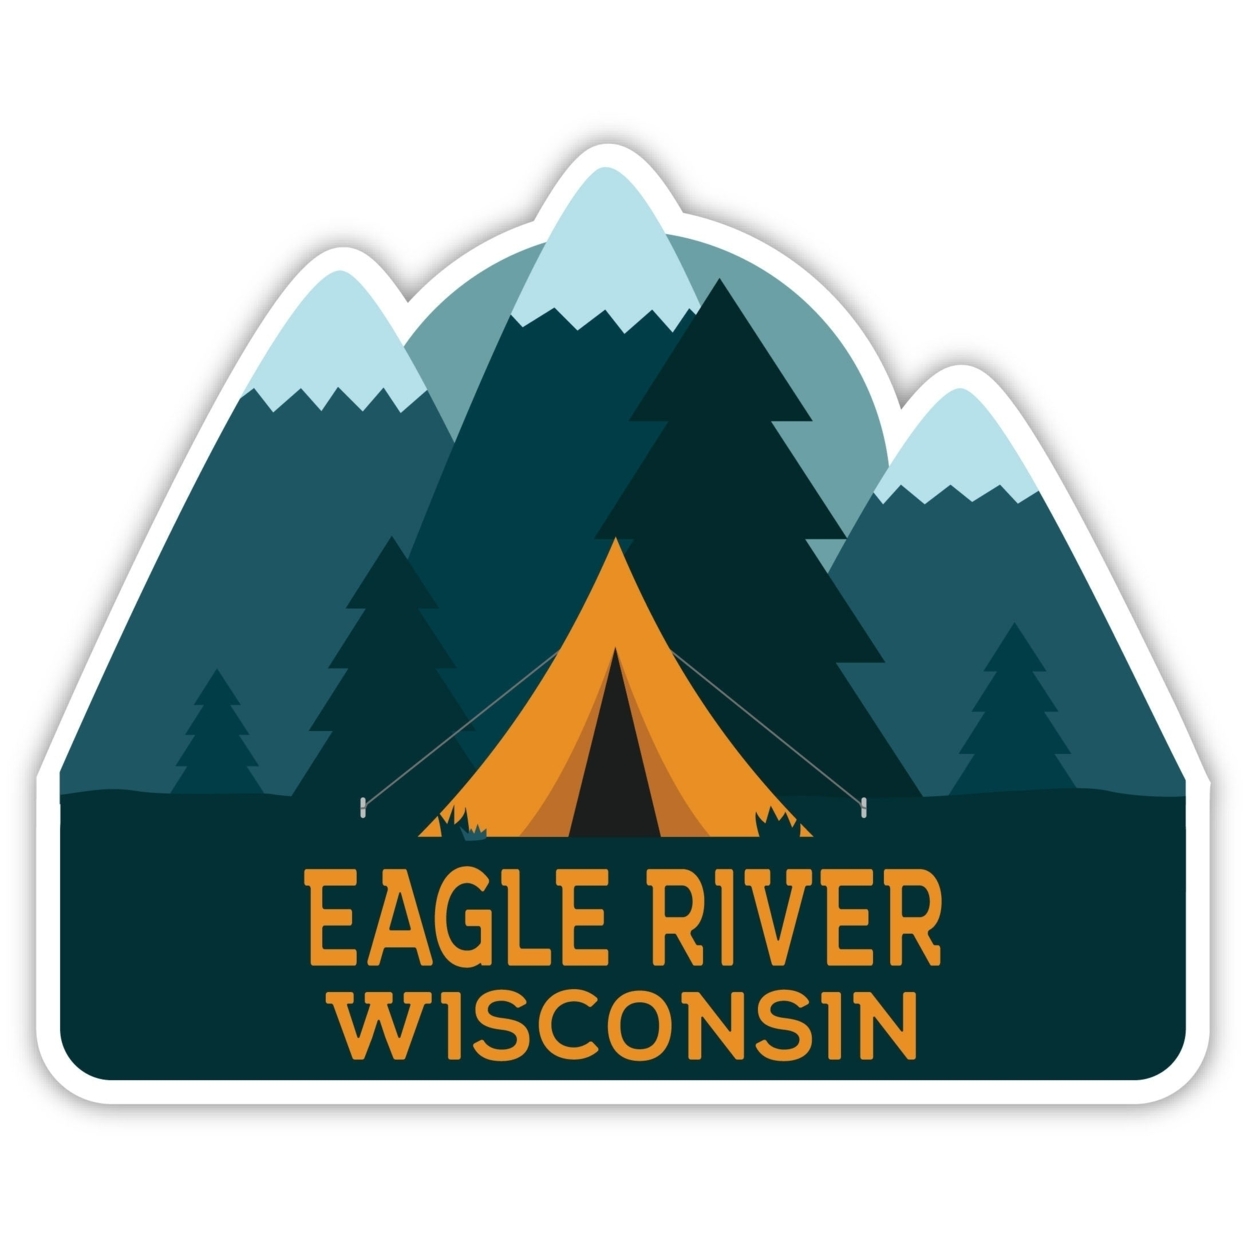 Eagle River Wisconsin Souvenir Decorative Stickers (Choose Theme And Size) - 4-Pack, 6-Inch, Adventures Awaits